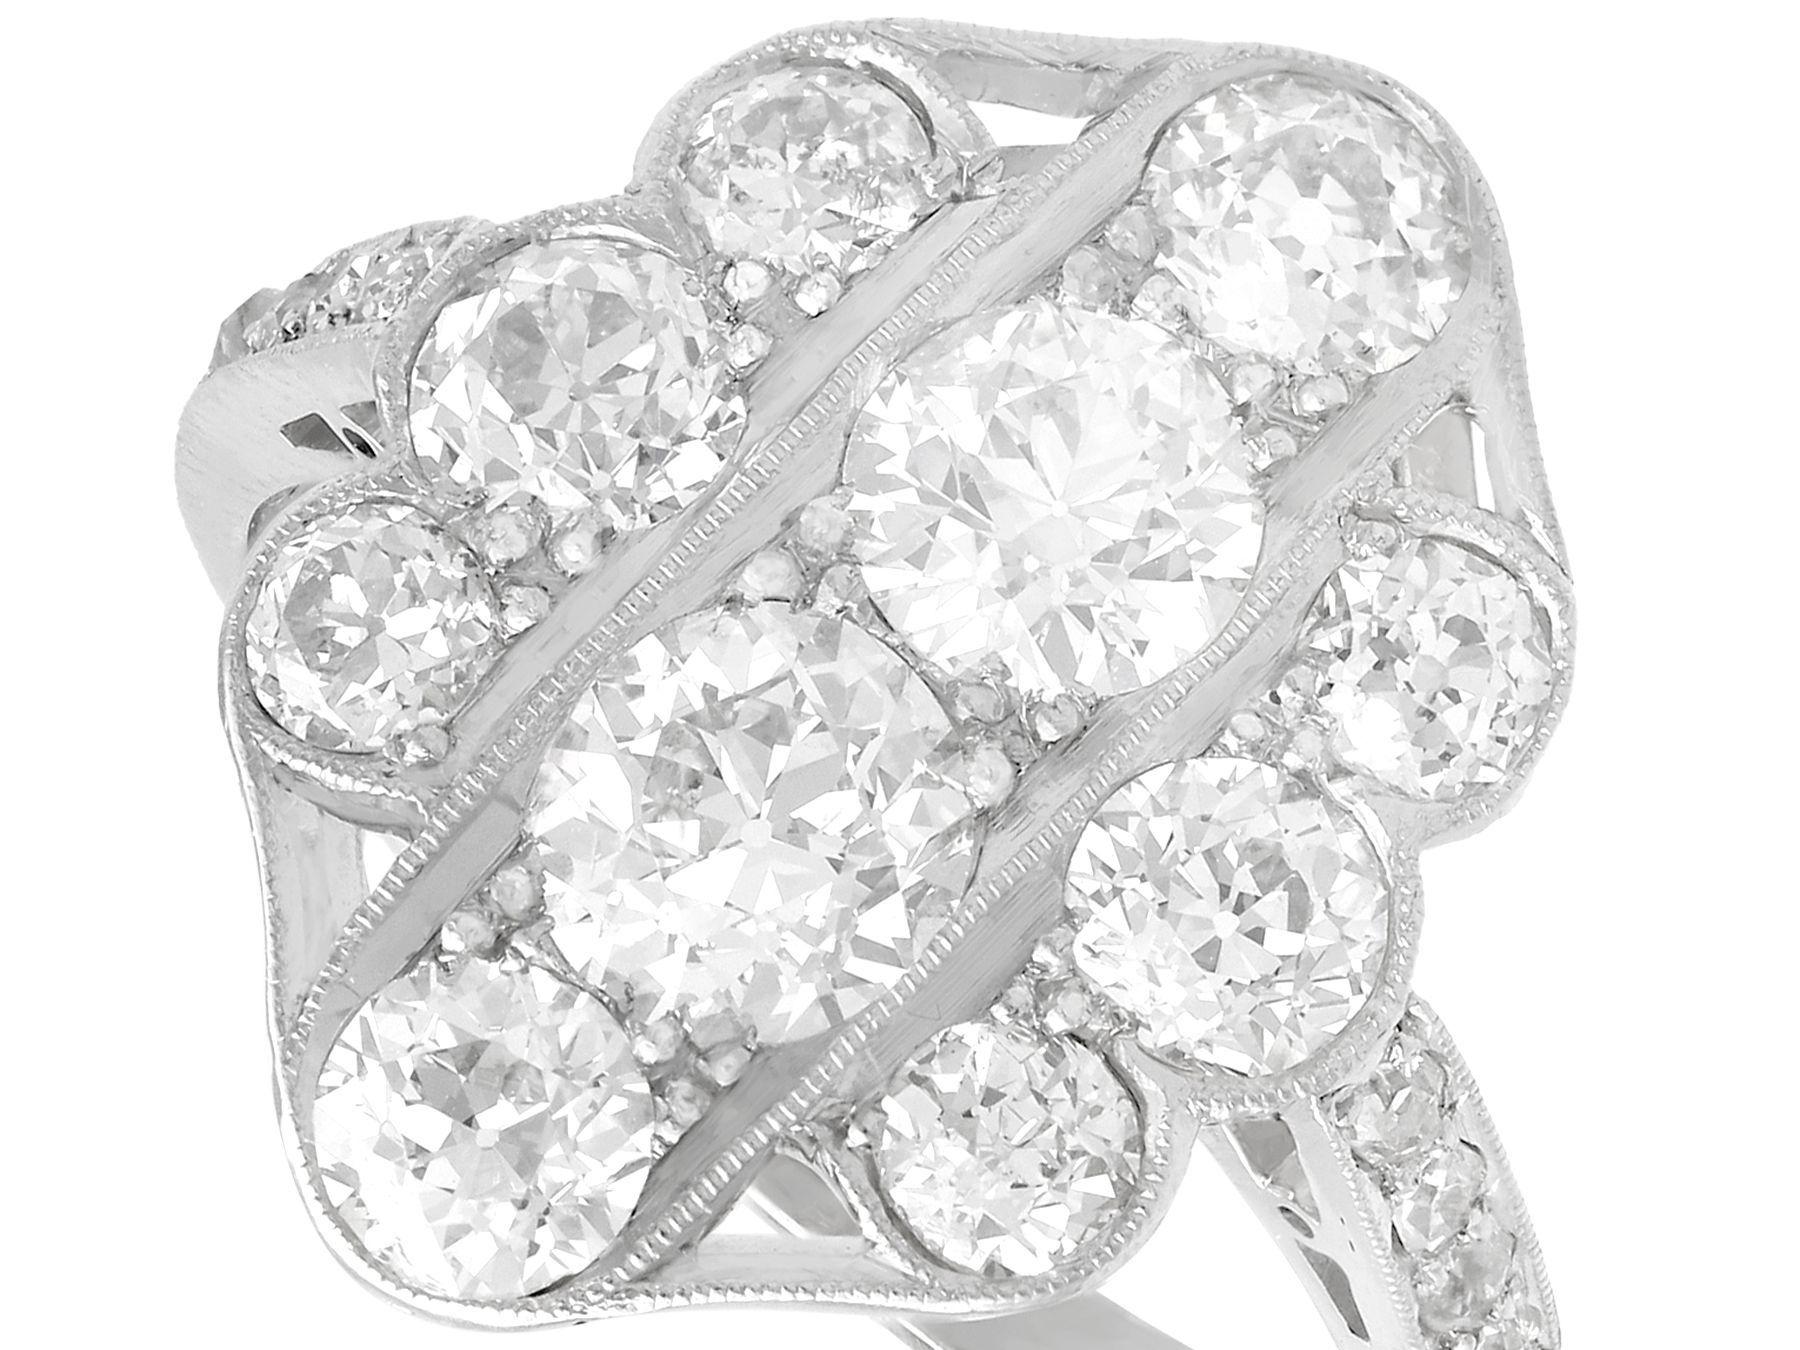 Retro Vintage 1940s 2.85 Carat Diamond and White Gold Cocktail Ring For Sale